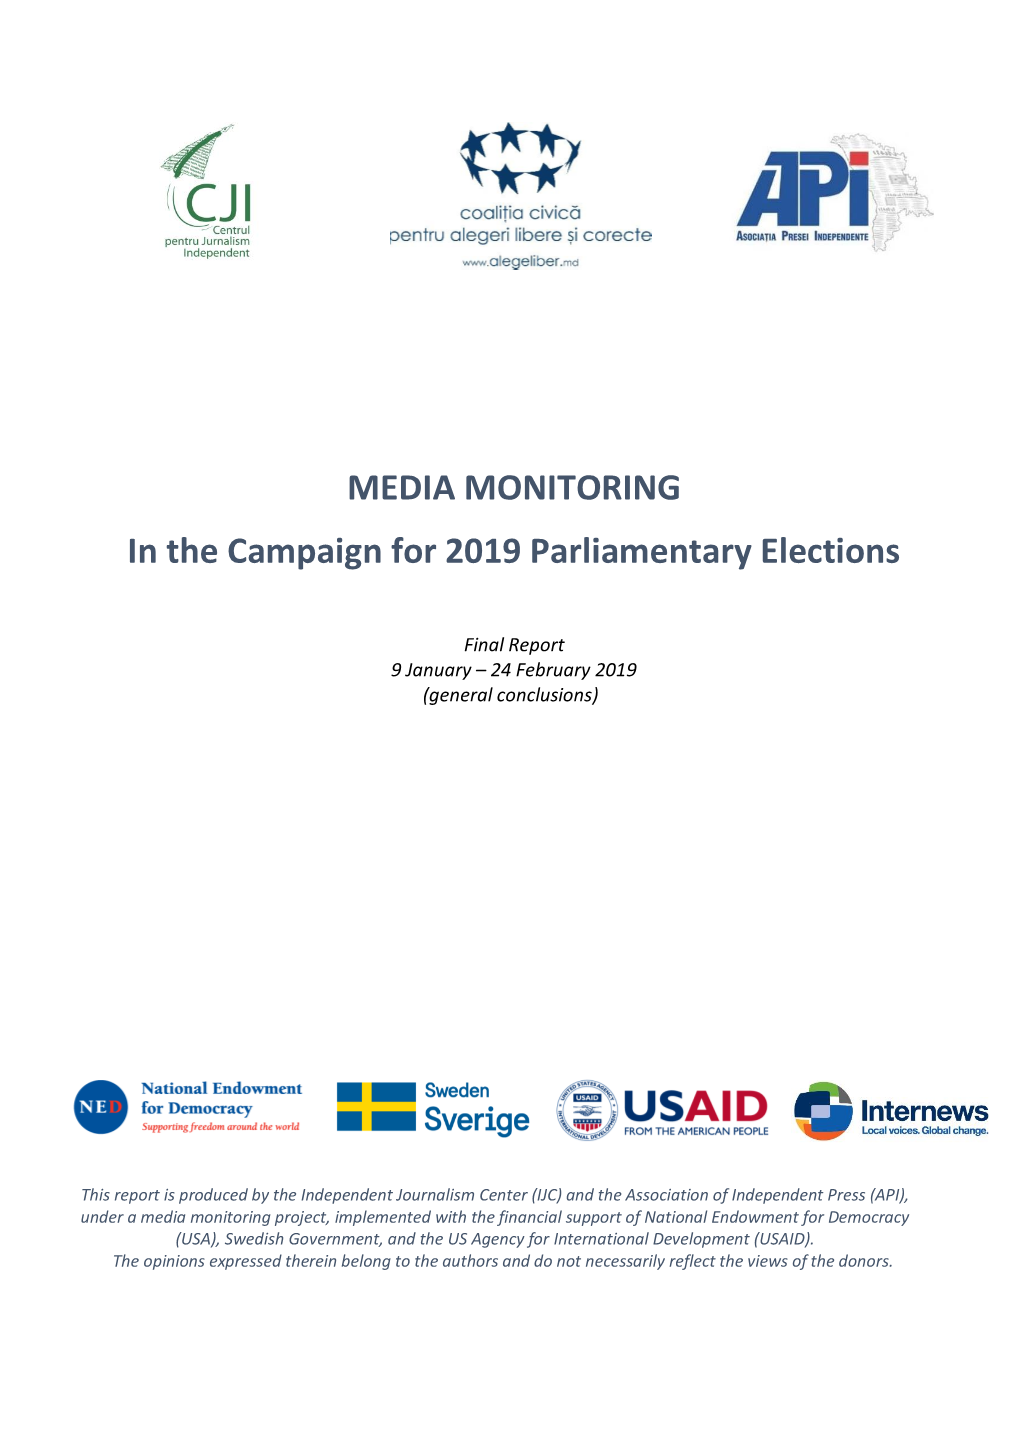 MEDIA MONITORING in the Campaign for 2019 Parliamentary Elections